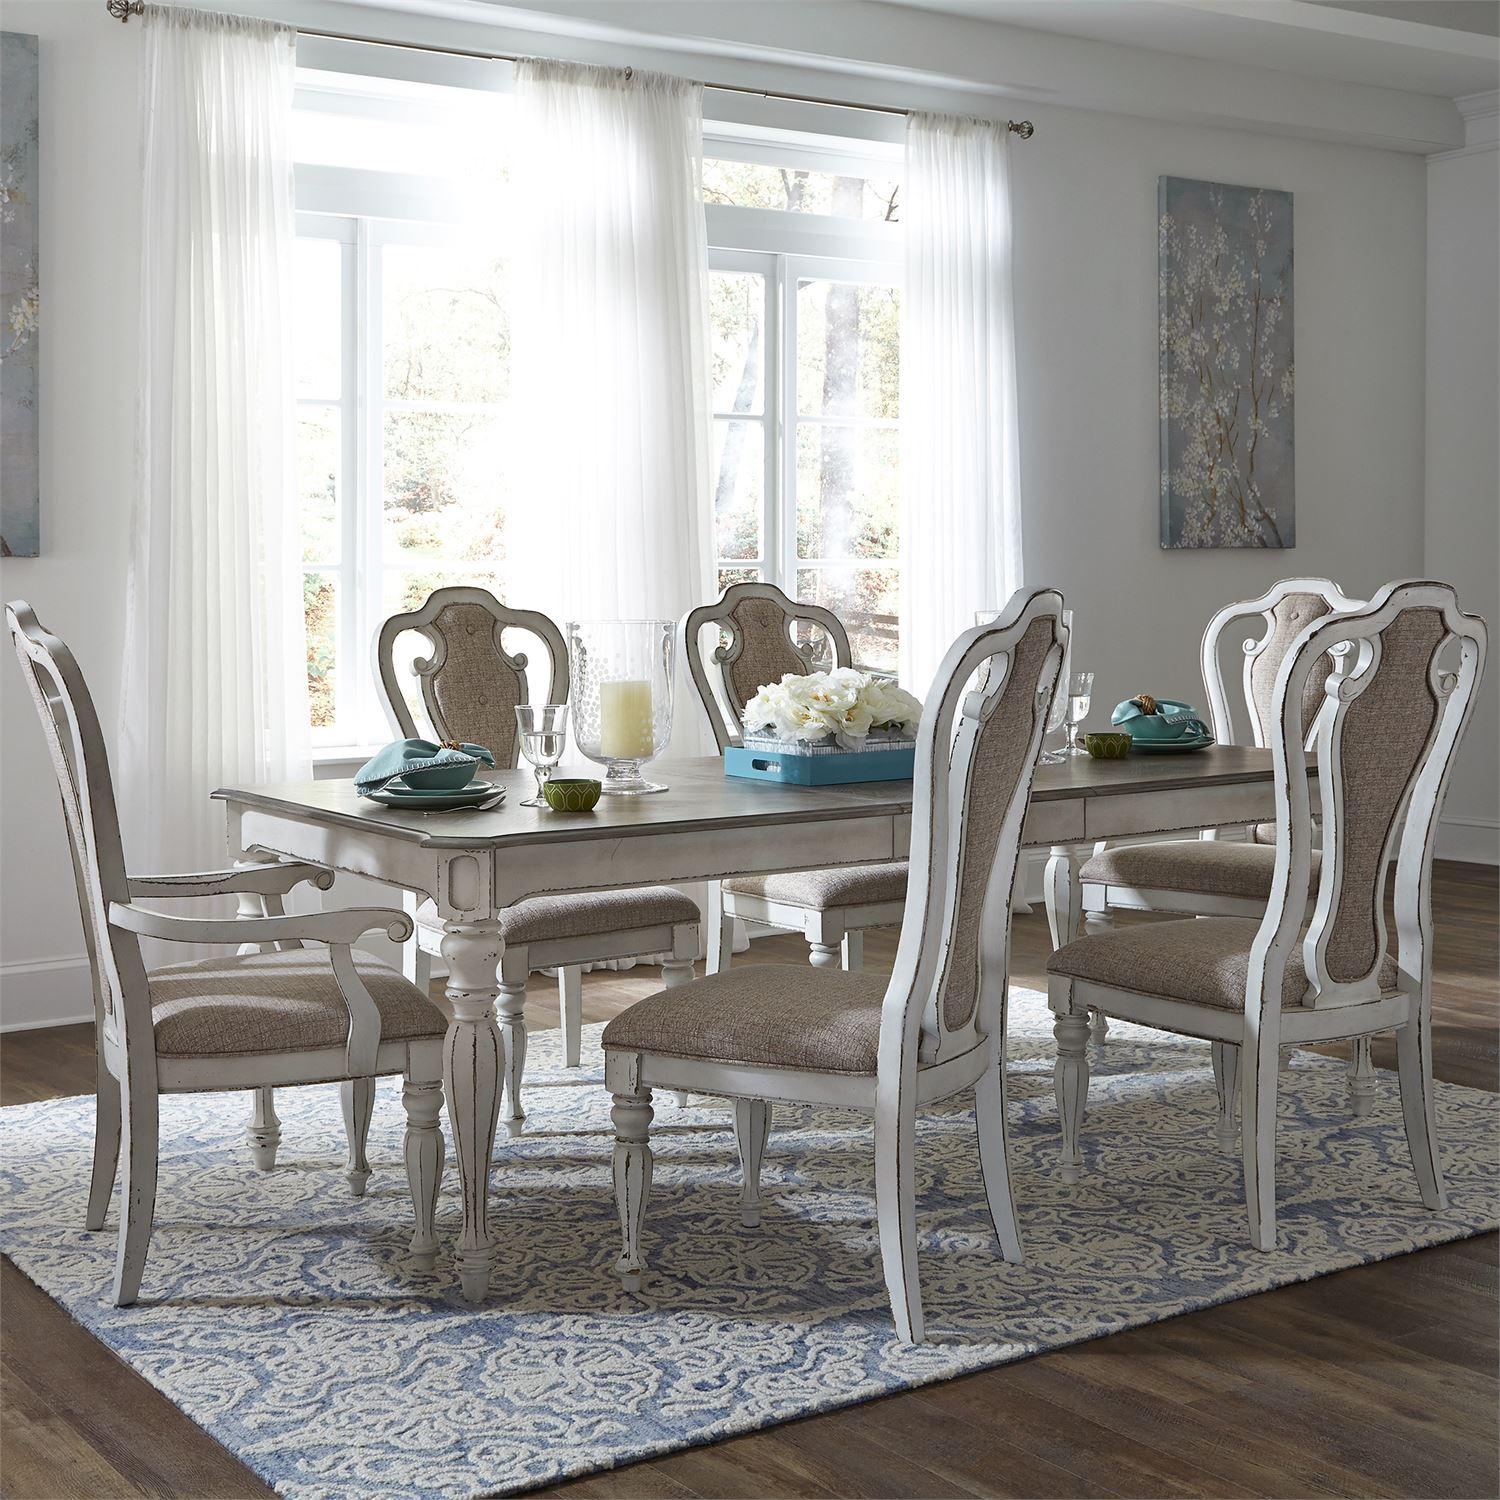 European Traditional Dining Table Set Magnolia Manor  (244-DR) Dining Room Set 244-DR-7LGS in White Chenille